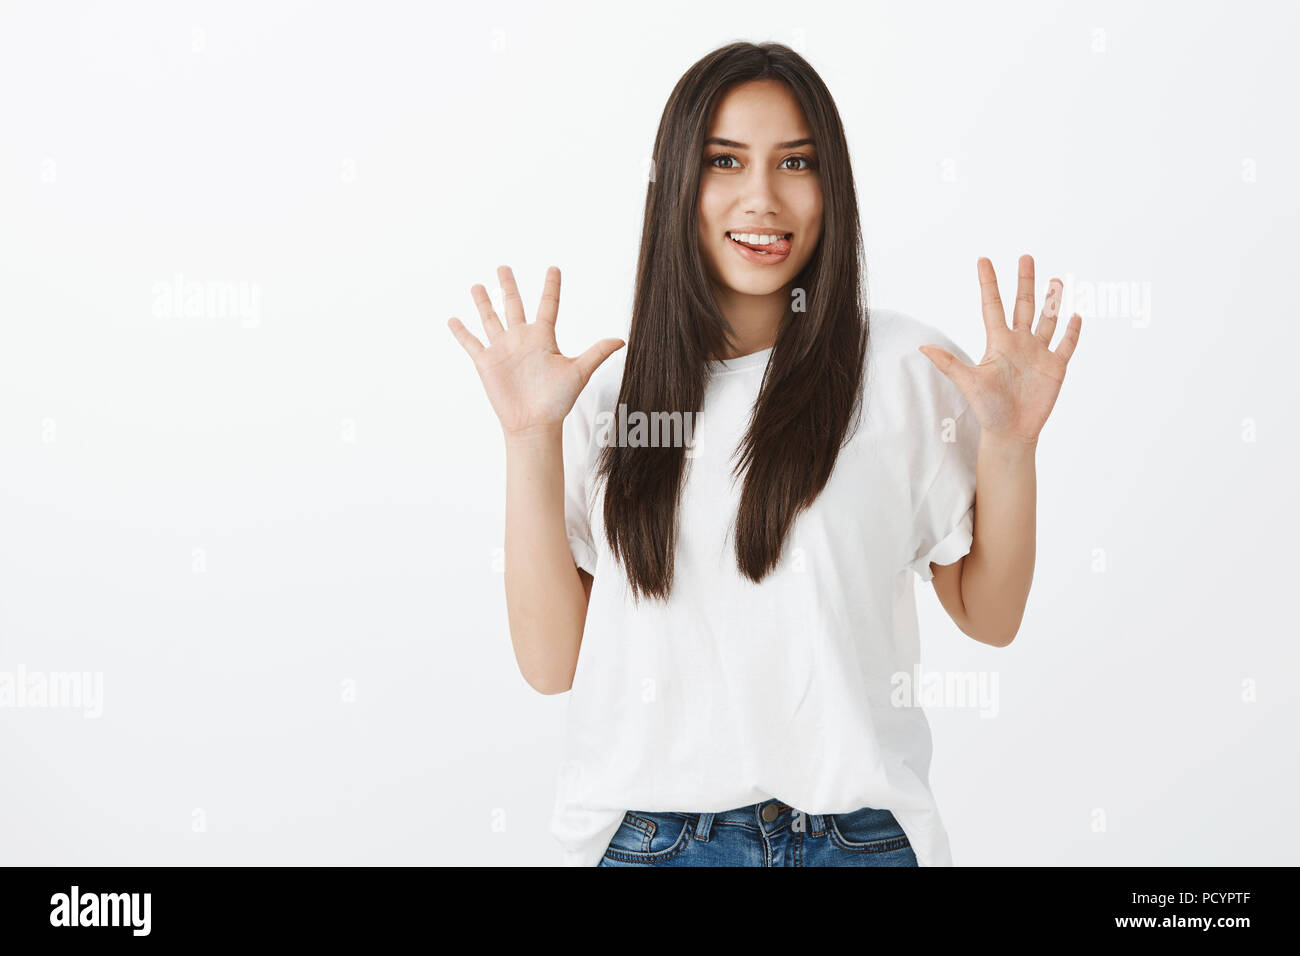 Jazz hands makes day brighter. Childish playful funny girl with long dark hair in casual outfit, raising palms and sticking out tongue, making faces w Stock Photo